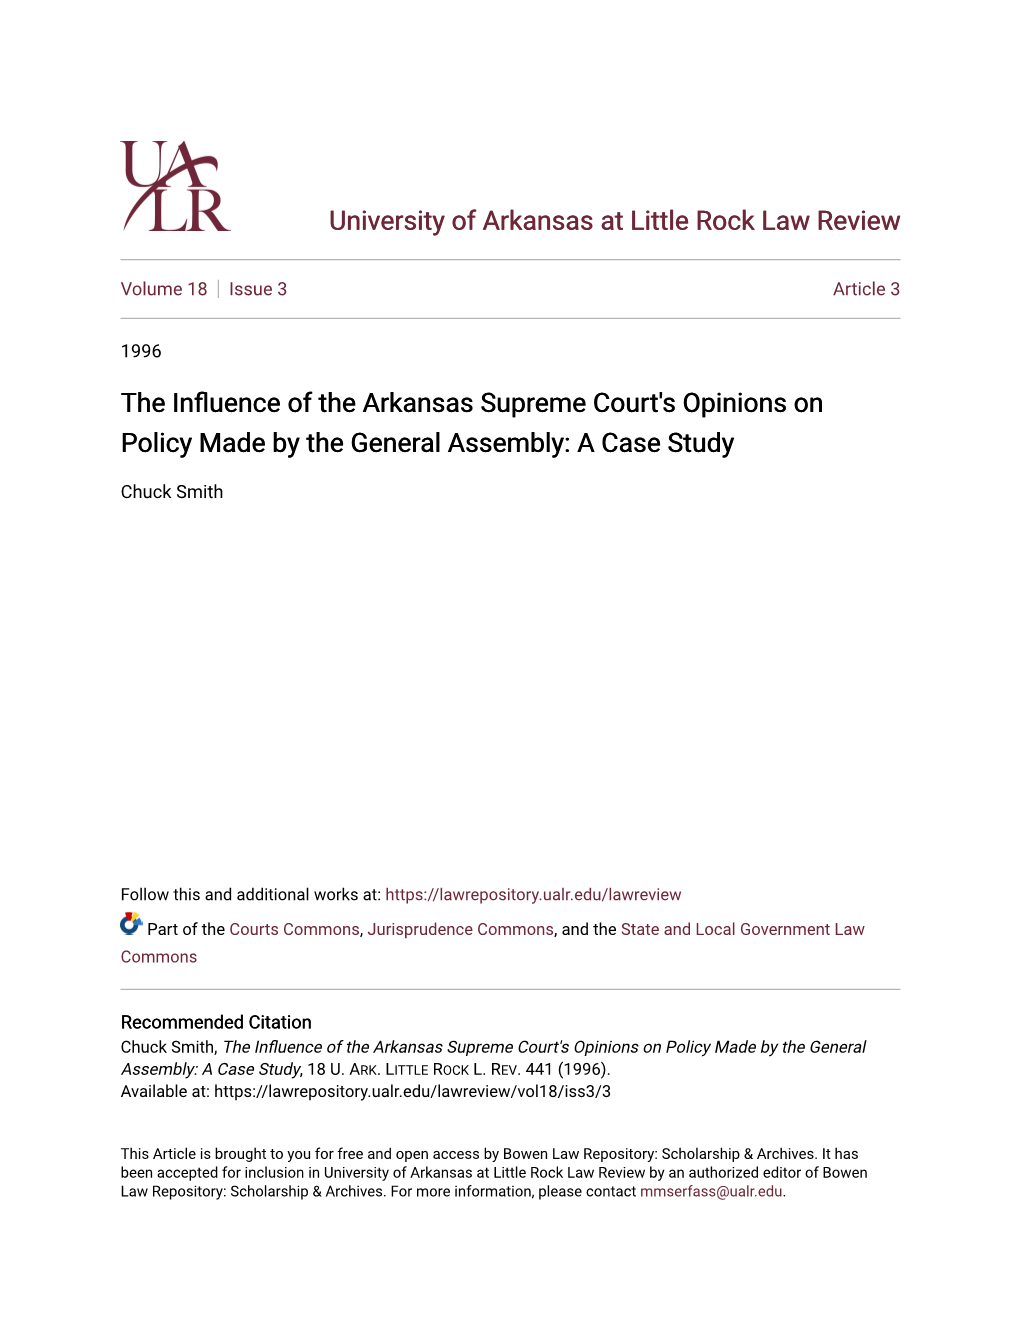 The Influence of the Arkansas Supreme Court's Opinions on Policy Made by the General Assembly: a Case Study